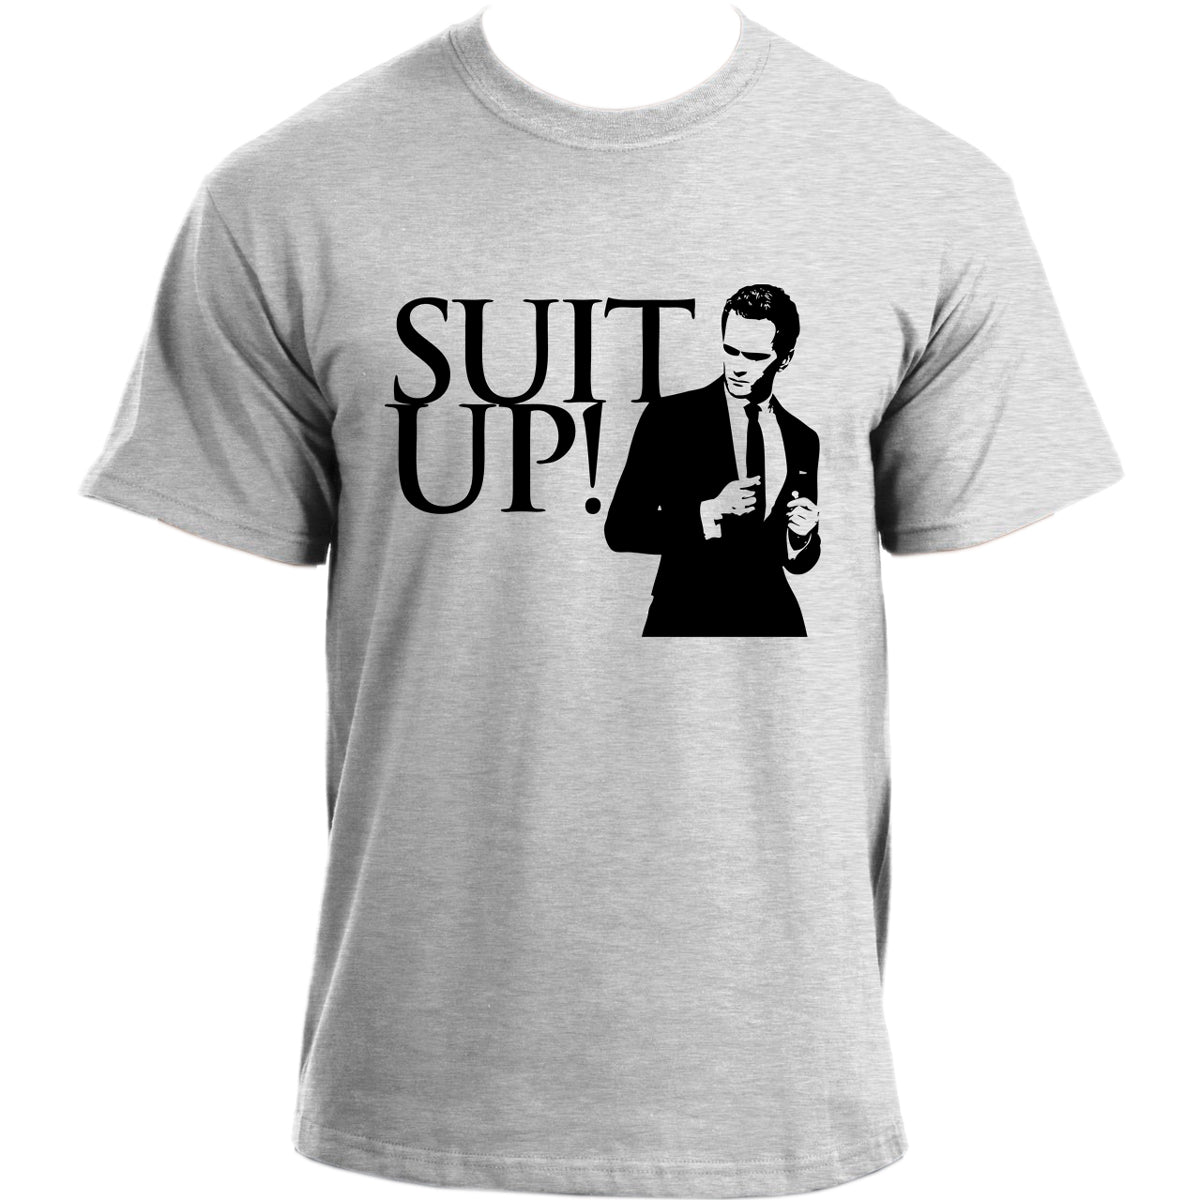 himym Barney Stinson Suit Up TV Series Inspired Funny T-shirt